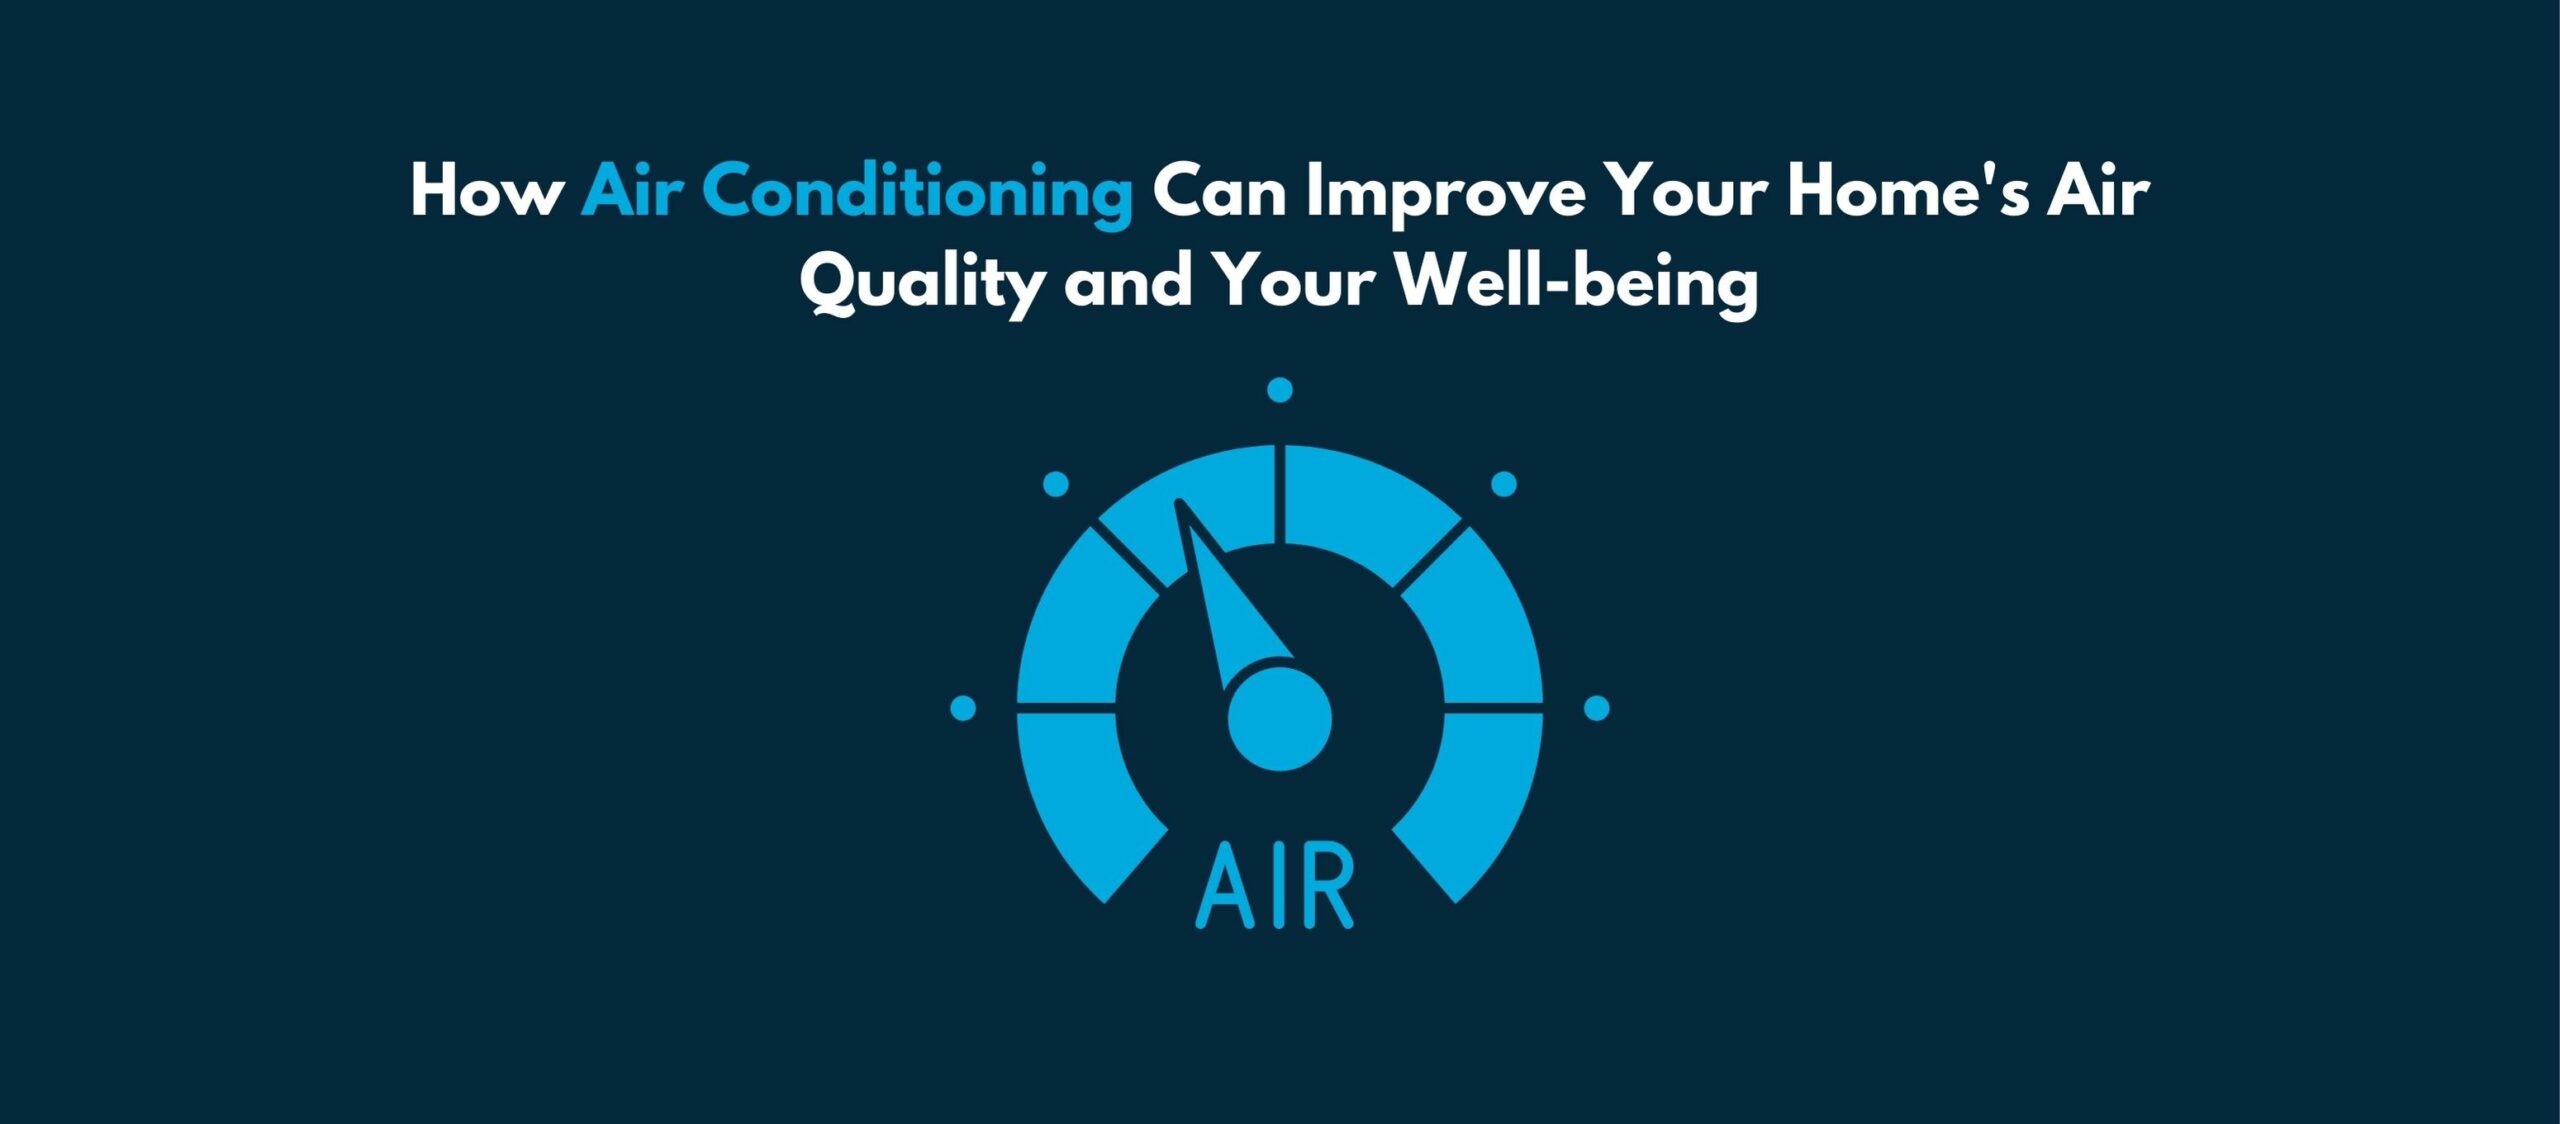 How Air Conditioning Can Improve Your Home’s Air Quality and Your Well-being